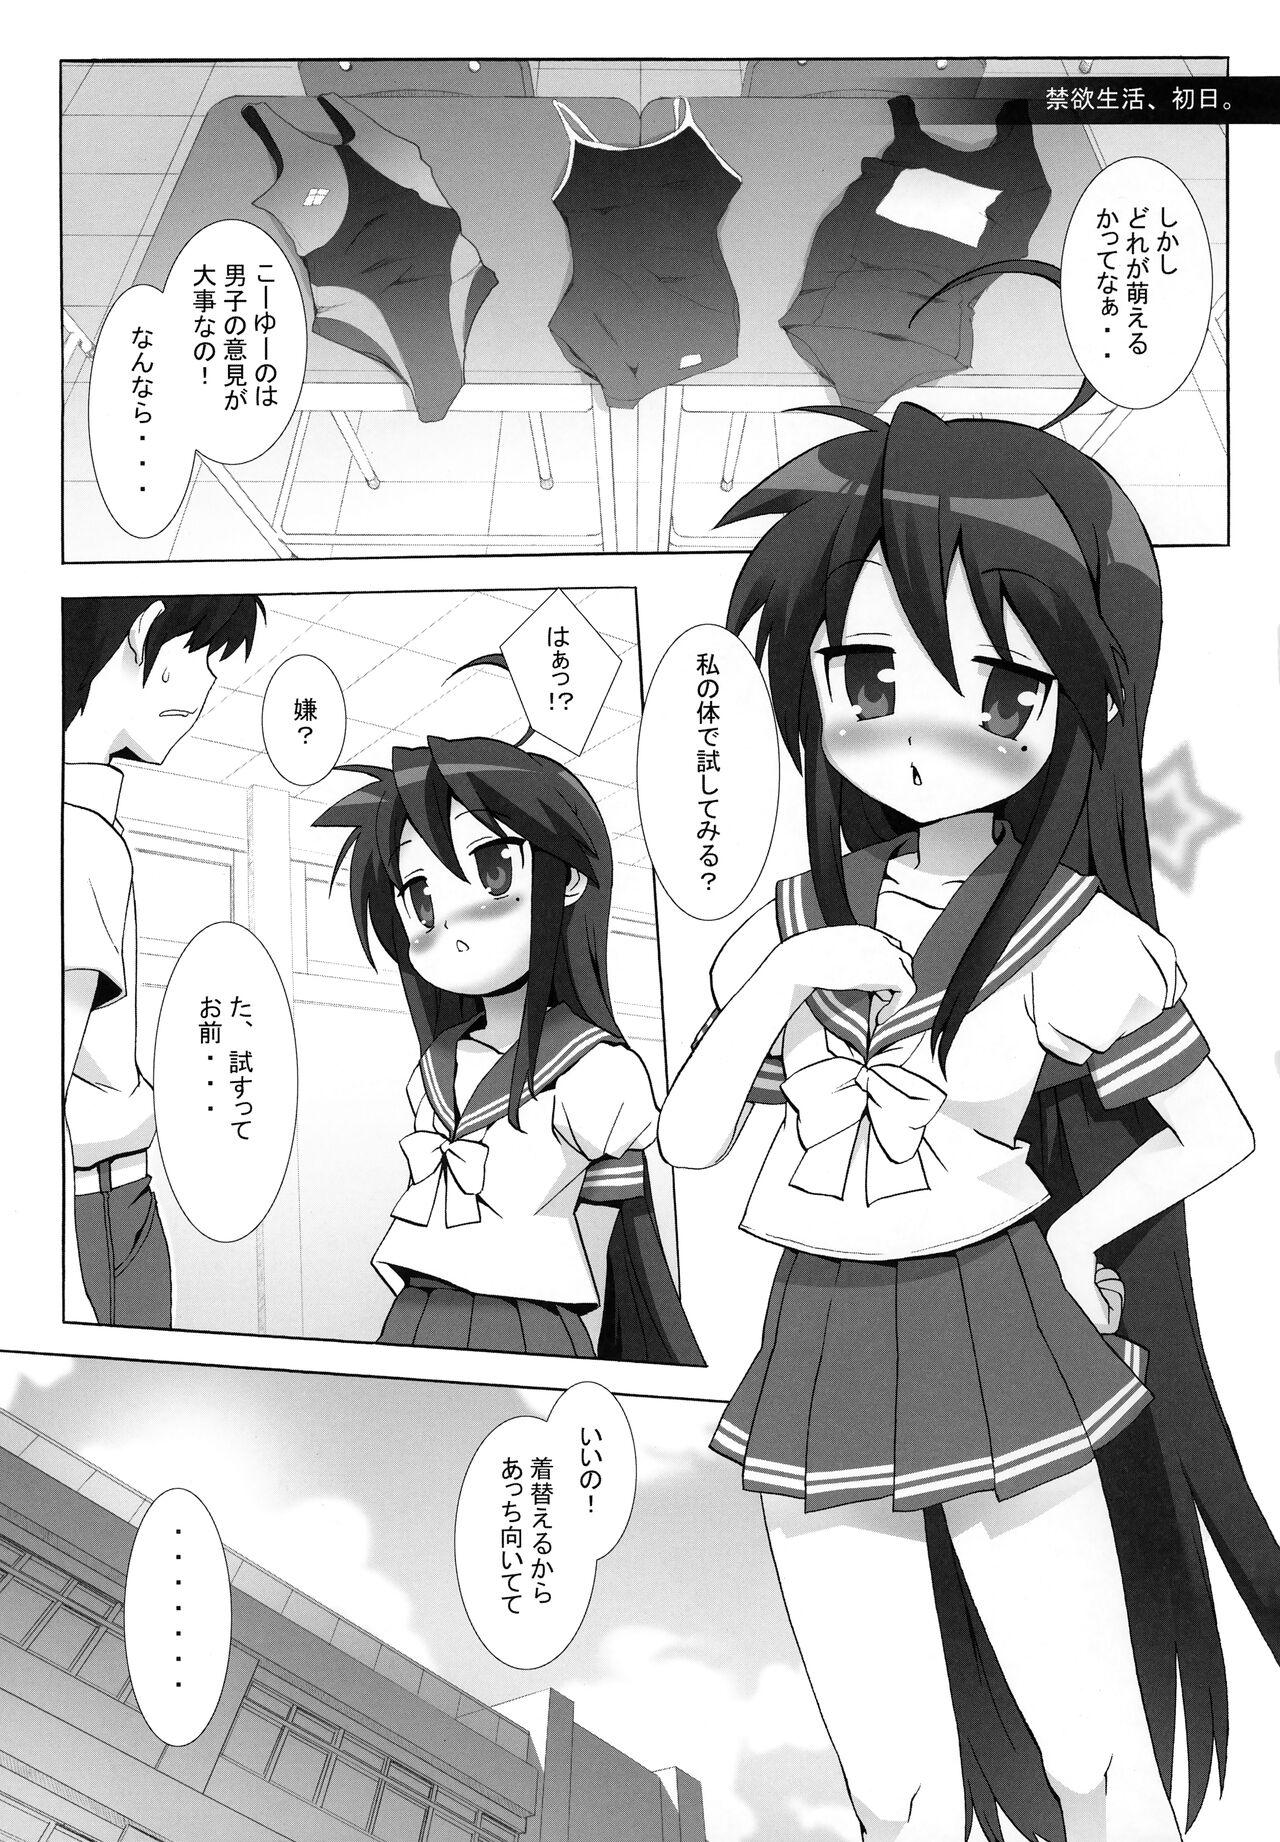 Petite Lucky Play - Lucky star Thief - Page 2